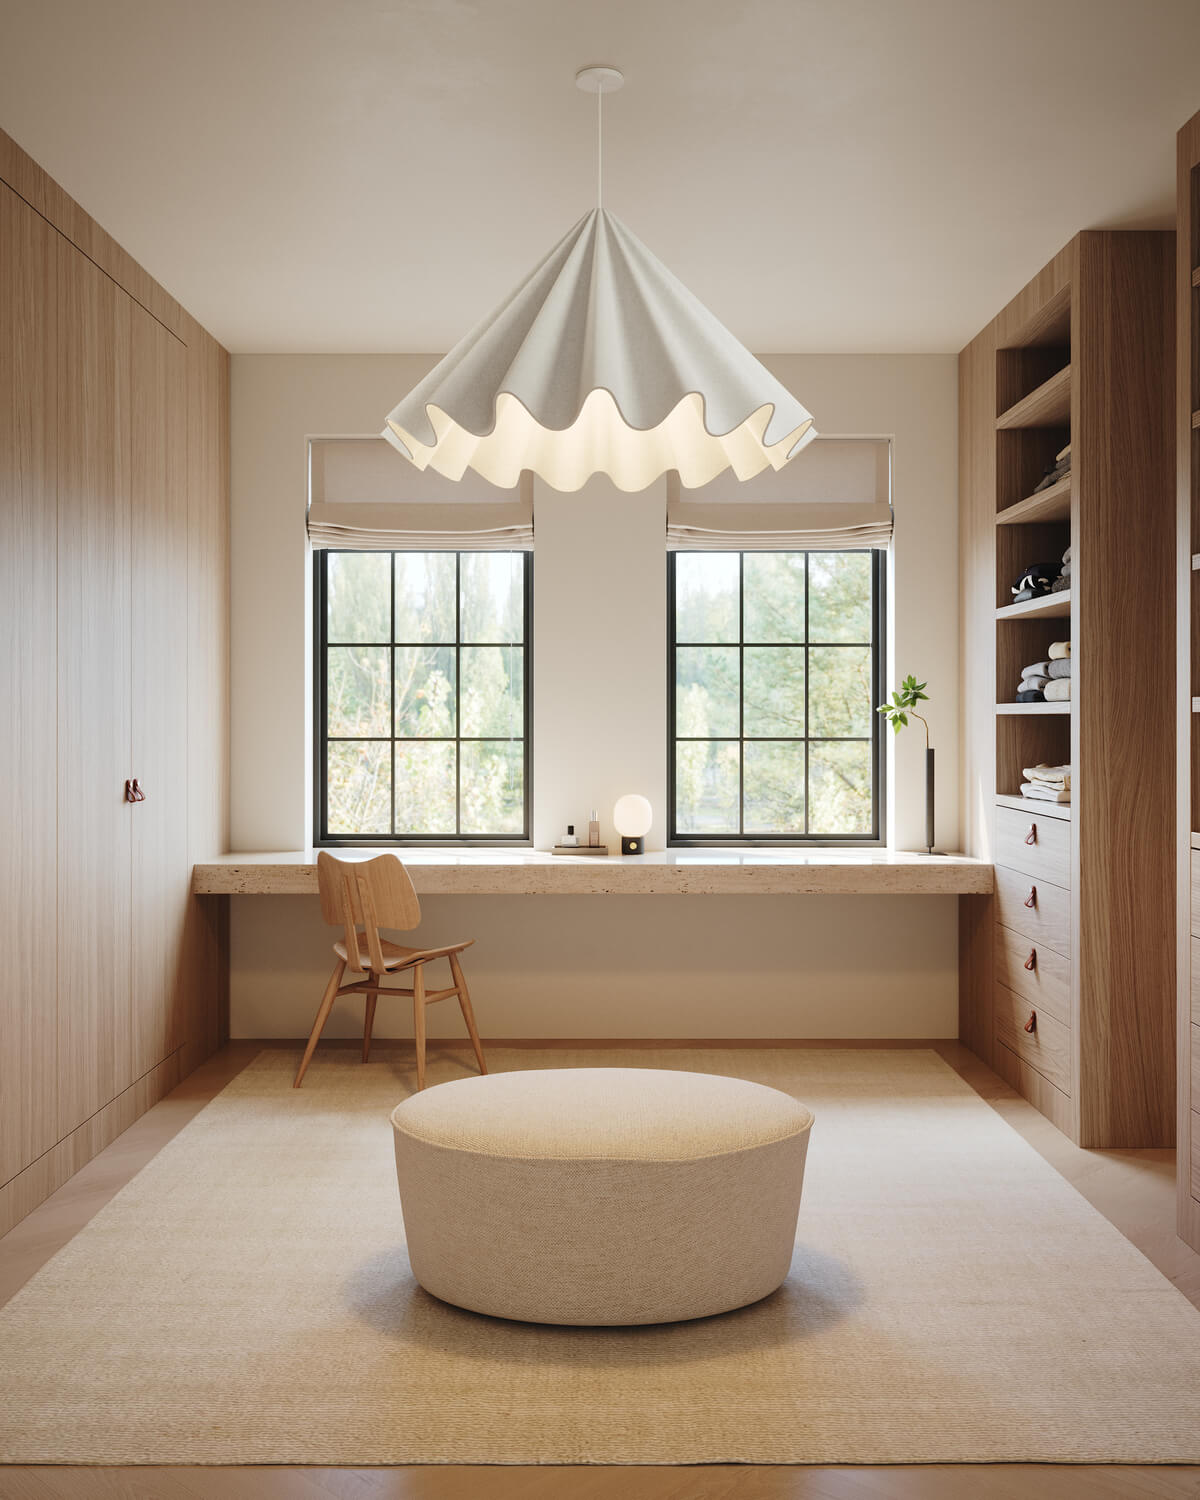 Neutral palette dressing room with white pendant light hanging from center